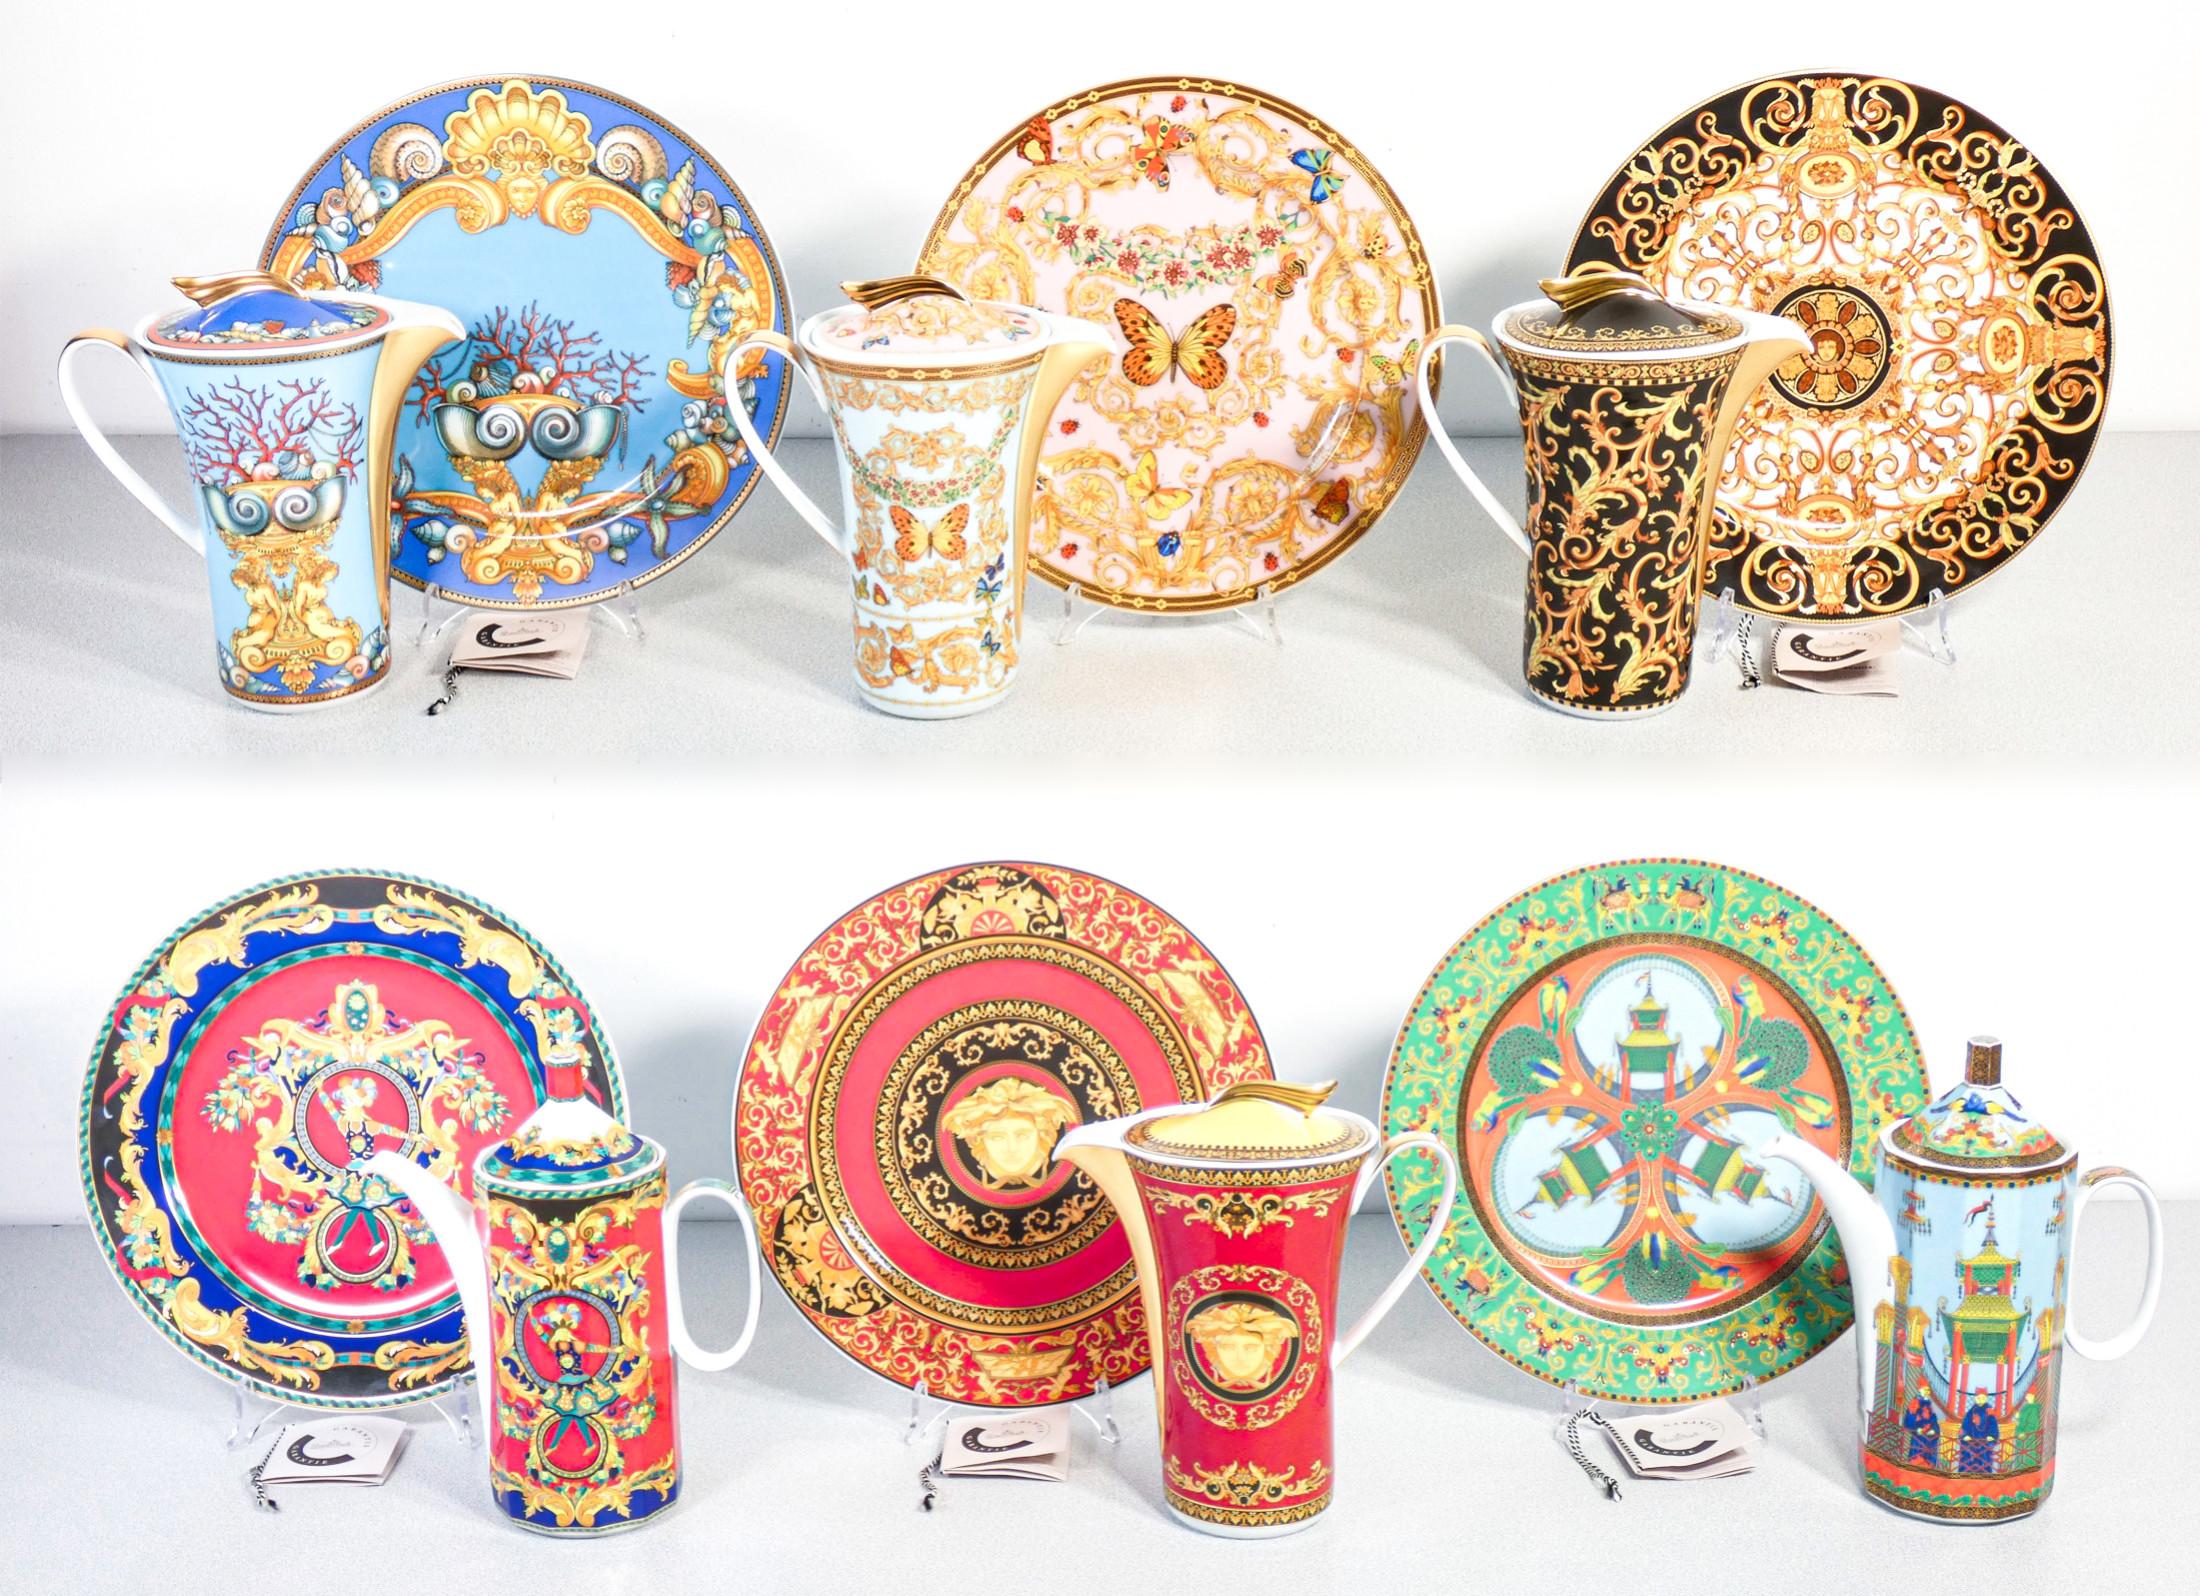 VERSACE Rosenthal Studio Linie. Set of six plates and coffee pots.
Silk-screened porcelain

ORIGIN
Germany

BRAND
Versace for Rosenthal

TEMPLATE
Dishes and coffee pots from the series:
> Jellyfish
> Le Voyage de Marco Polo
> Le Roi